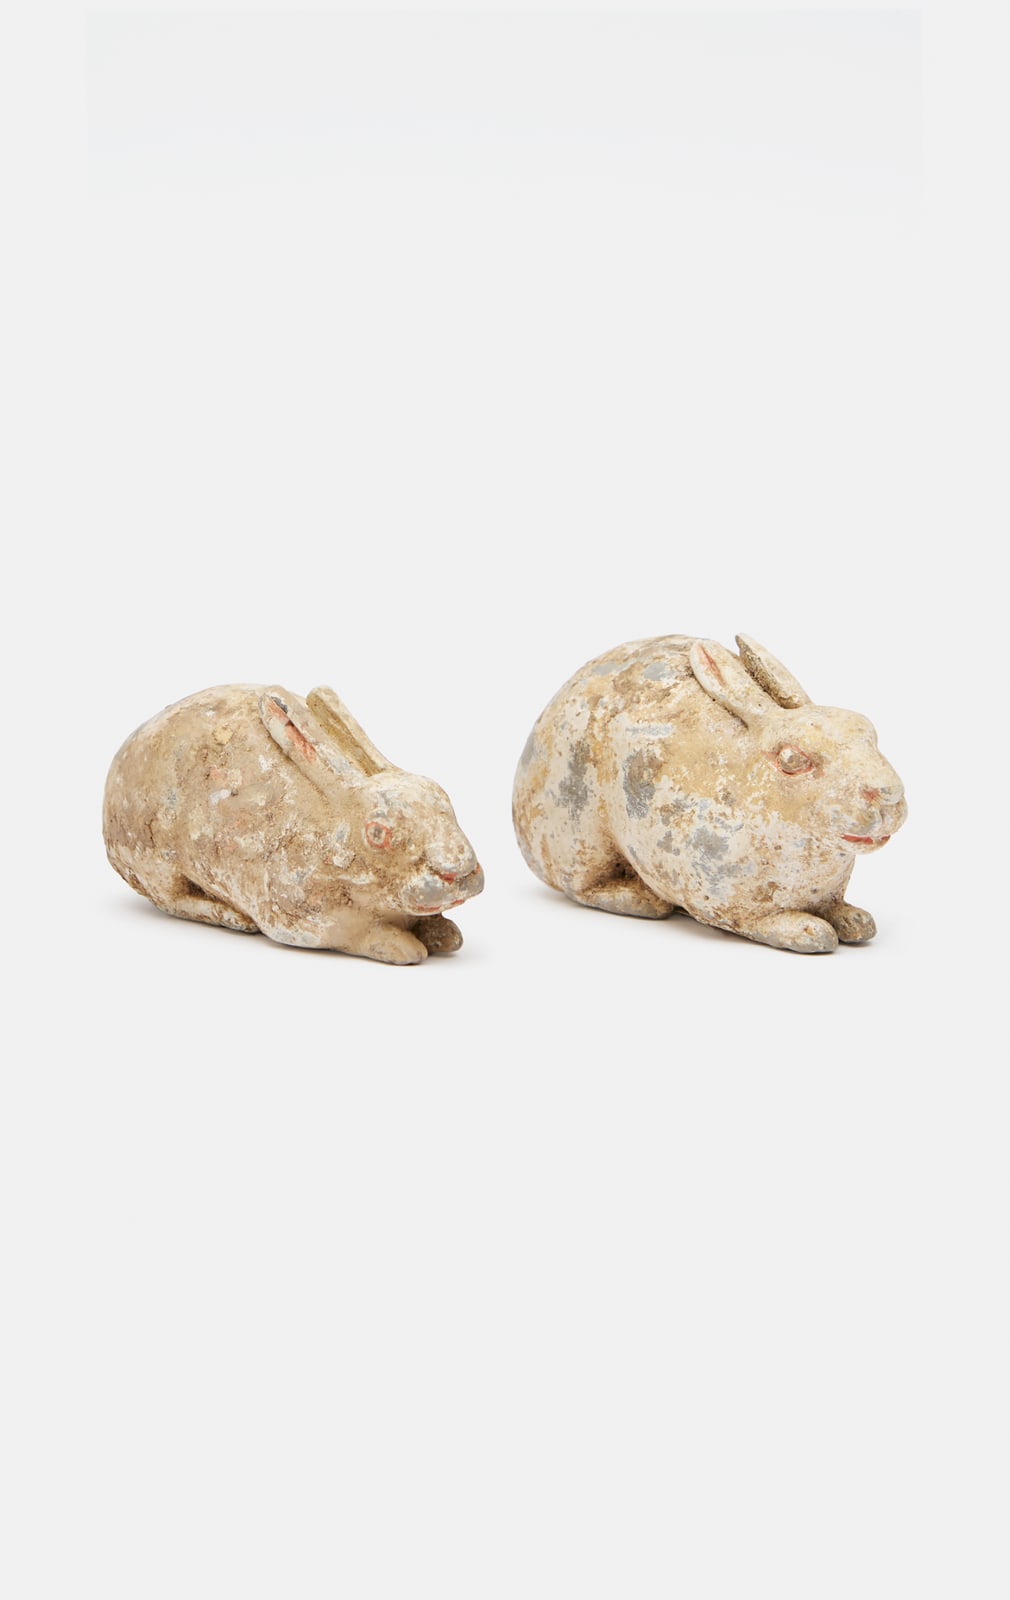 Anon, A pair of terracotta hares, Han dynasty, 206 BC - 220 AD